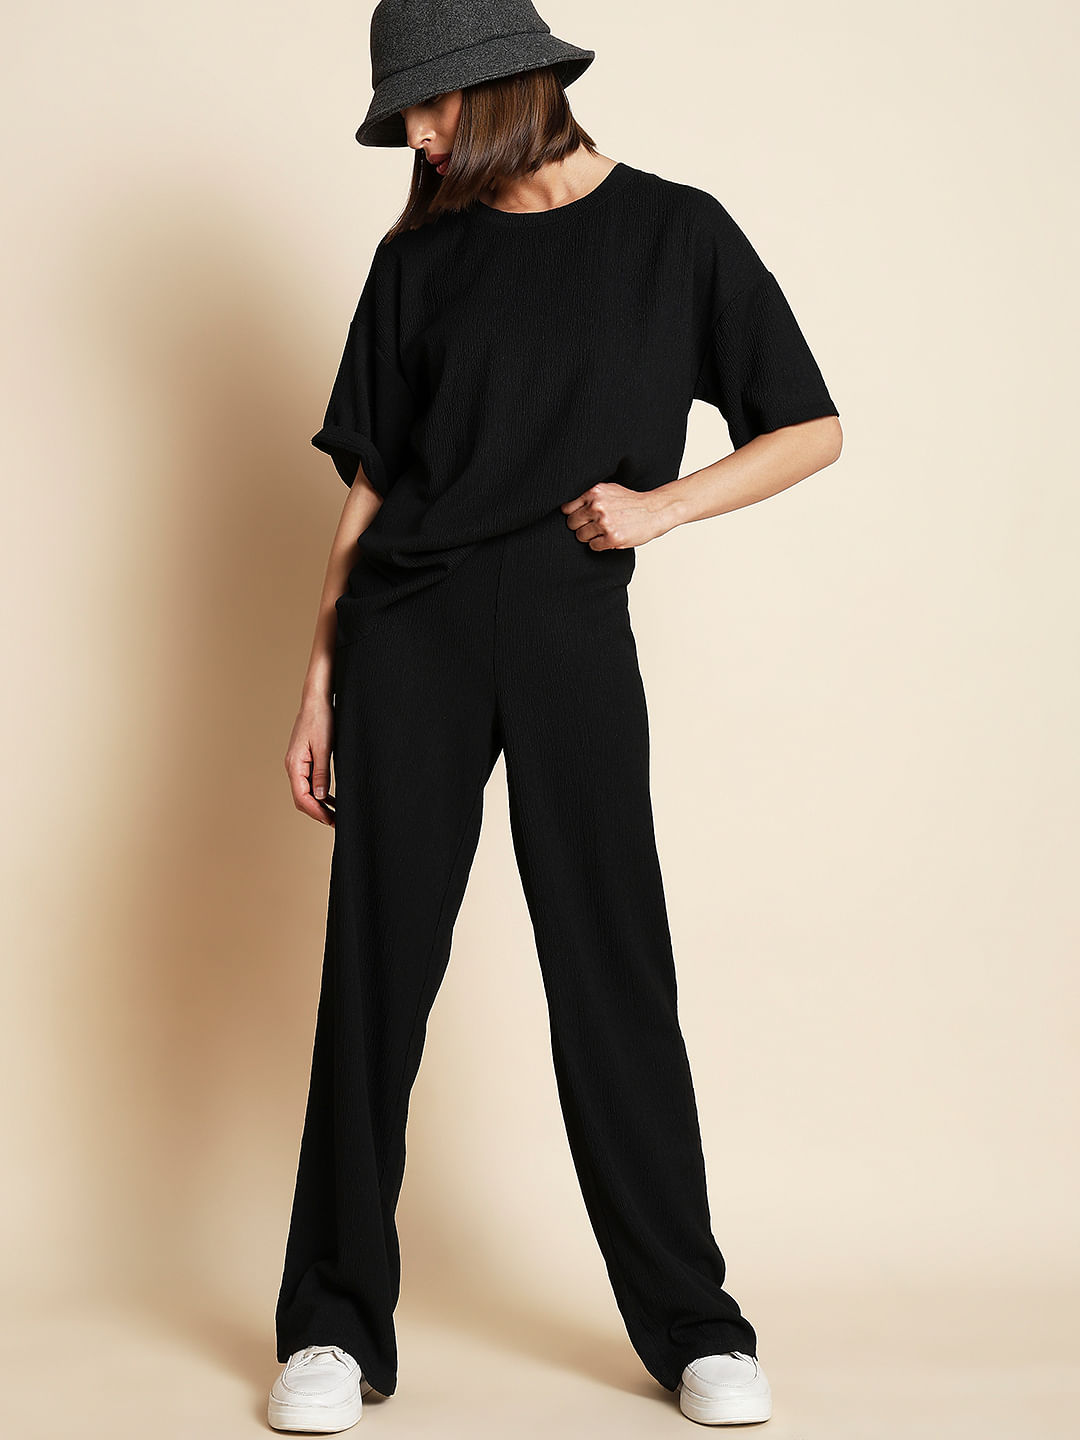 Buy Nelly My Favourite Pants - Black | Nelly.com